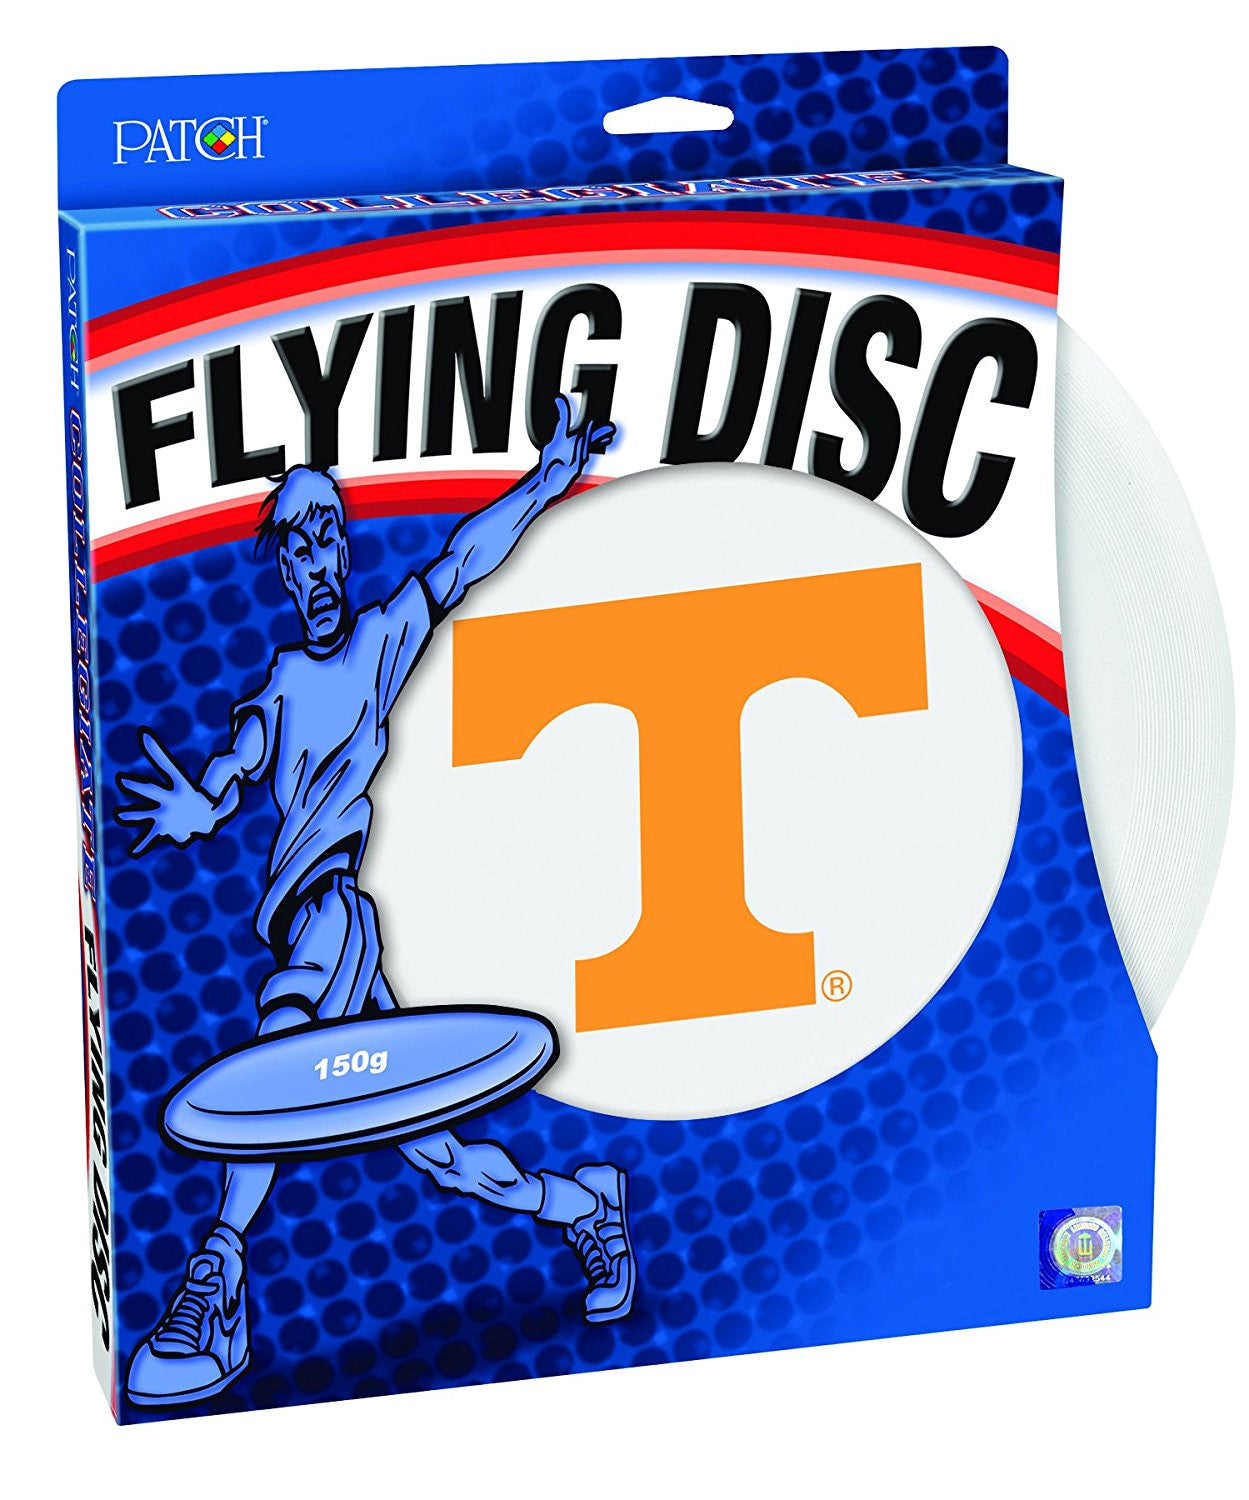 Patch Products Tennessee Flying Disc N23570